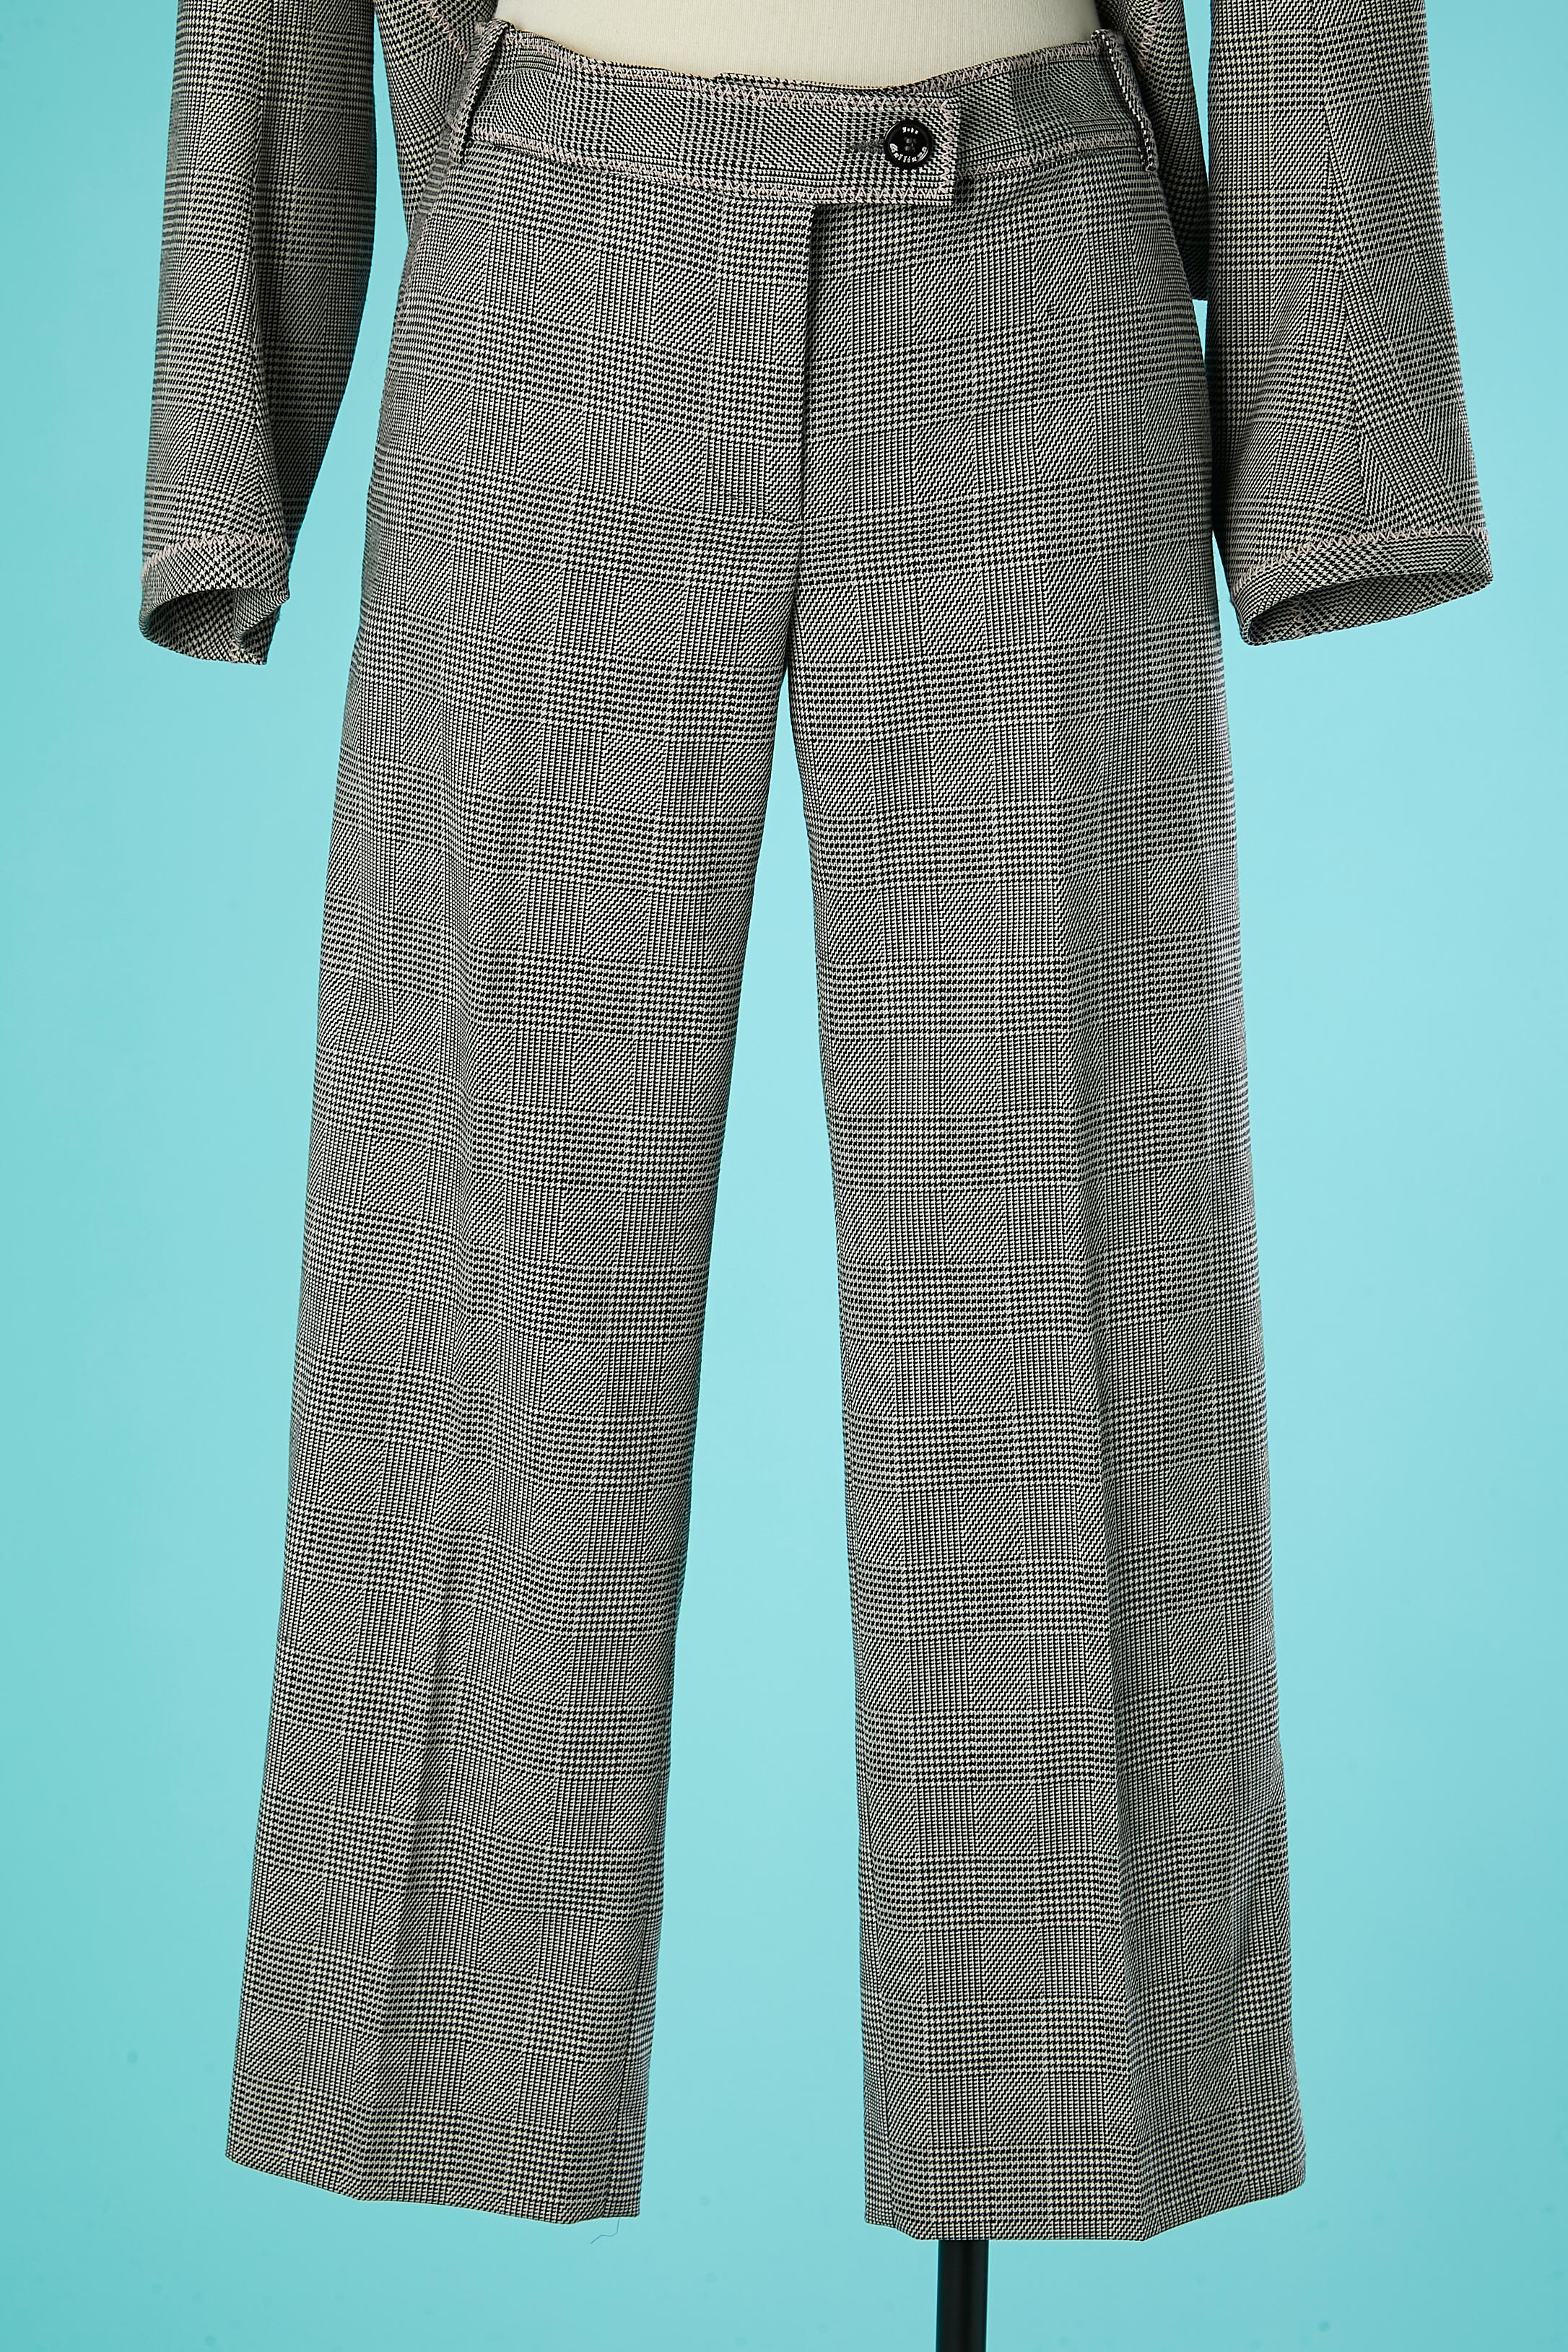 Prince of Wales pattern trouser-suit John Galliano  For Sale 3